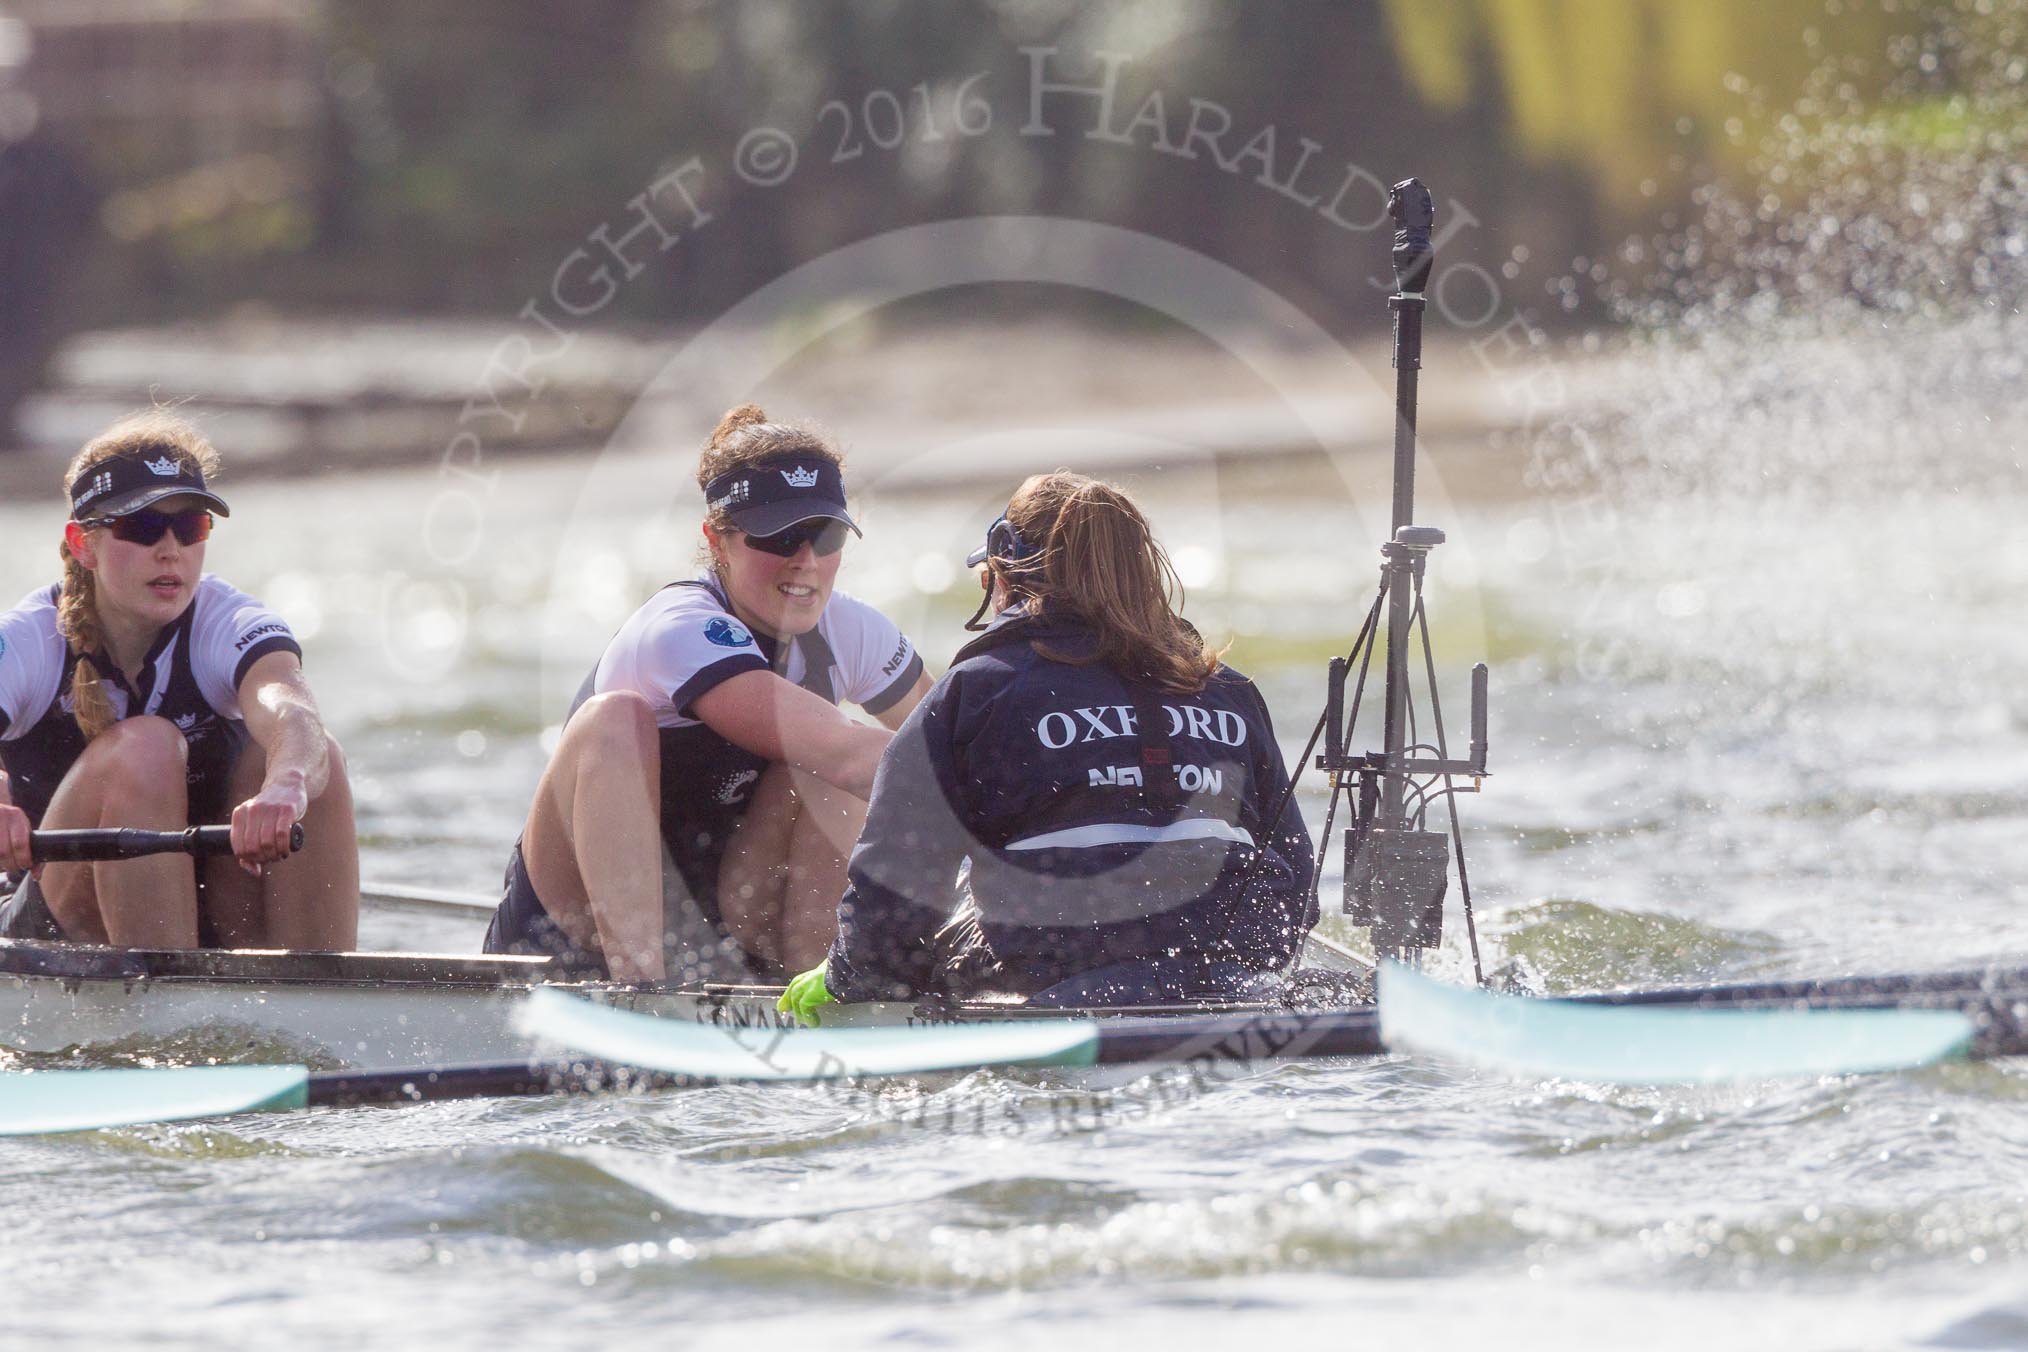 The Boat Race season 2016 -  The Cancer Research Women's Boat Race.
River Thames between Putney Bridge and Mortlake,
London SW15,

United Kingdom,
on 27 March 2016 at 14:21, image #260